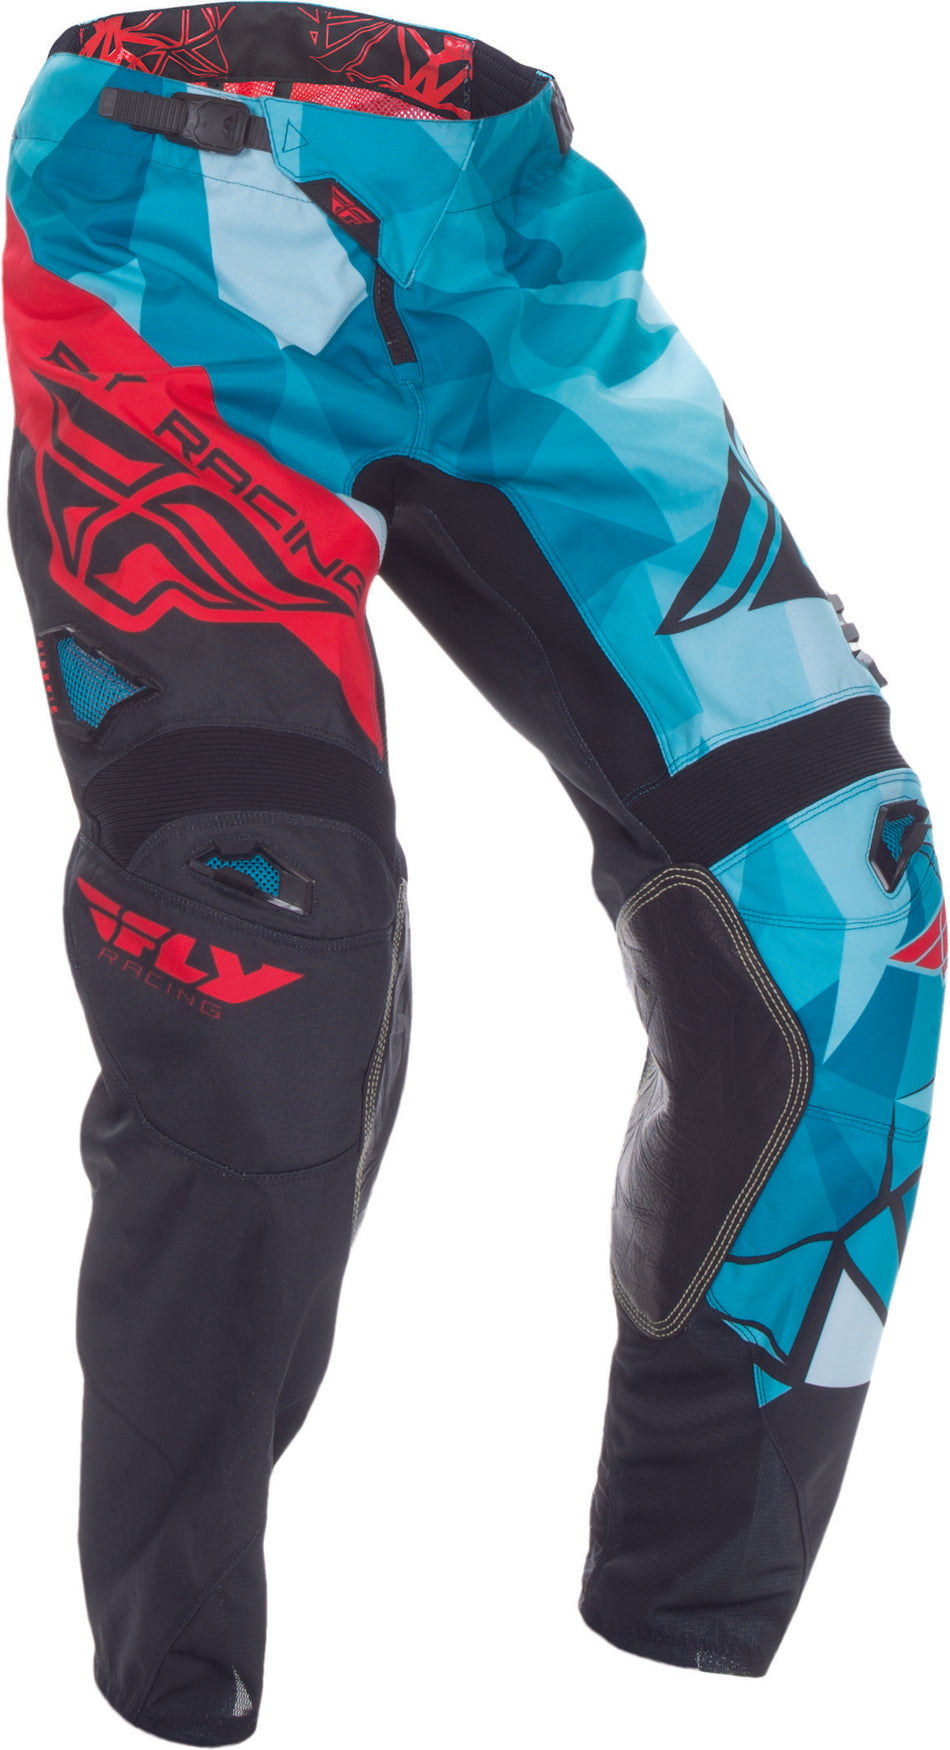 FLY RACING Kinetic Crux Pant Teal/Red Sz 30 370-53930